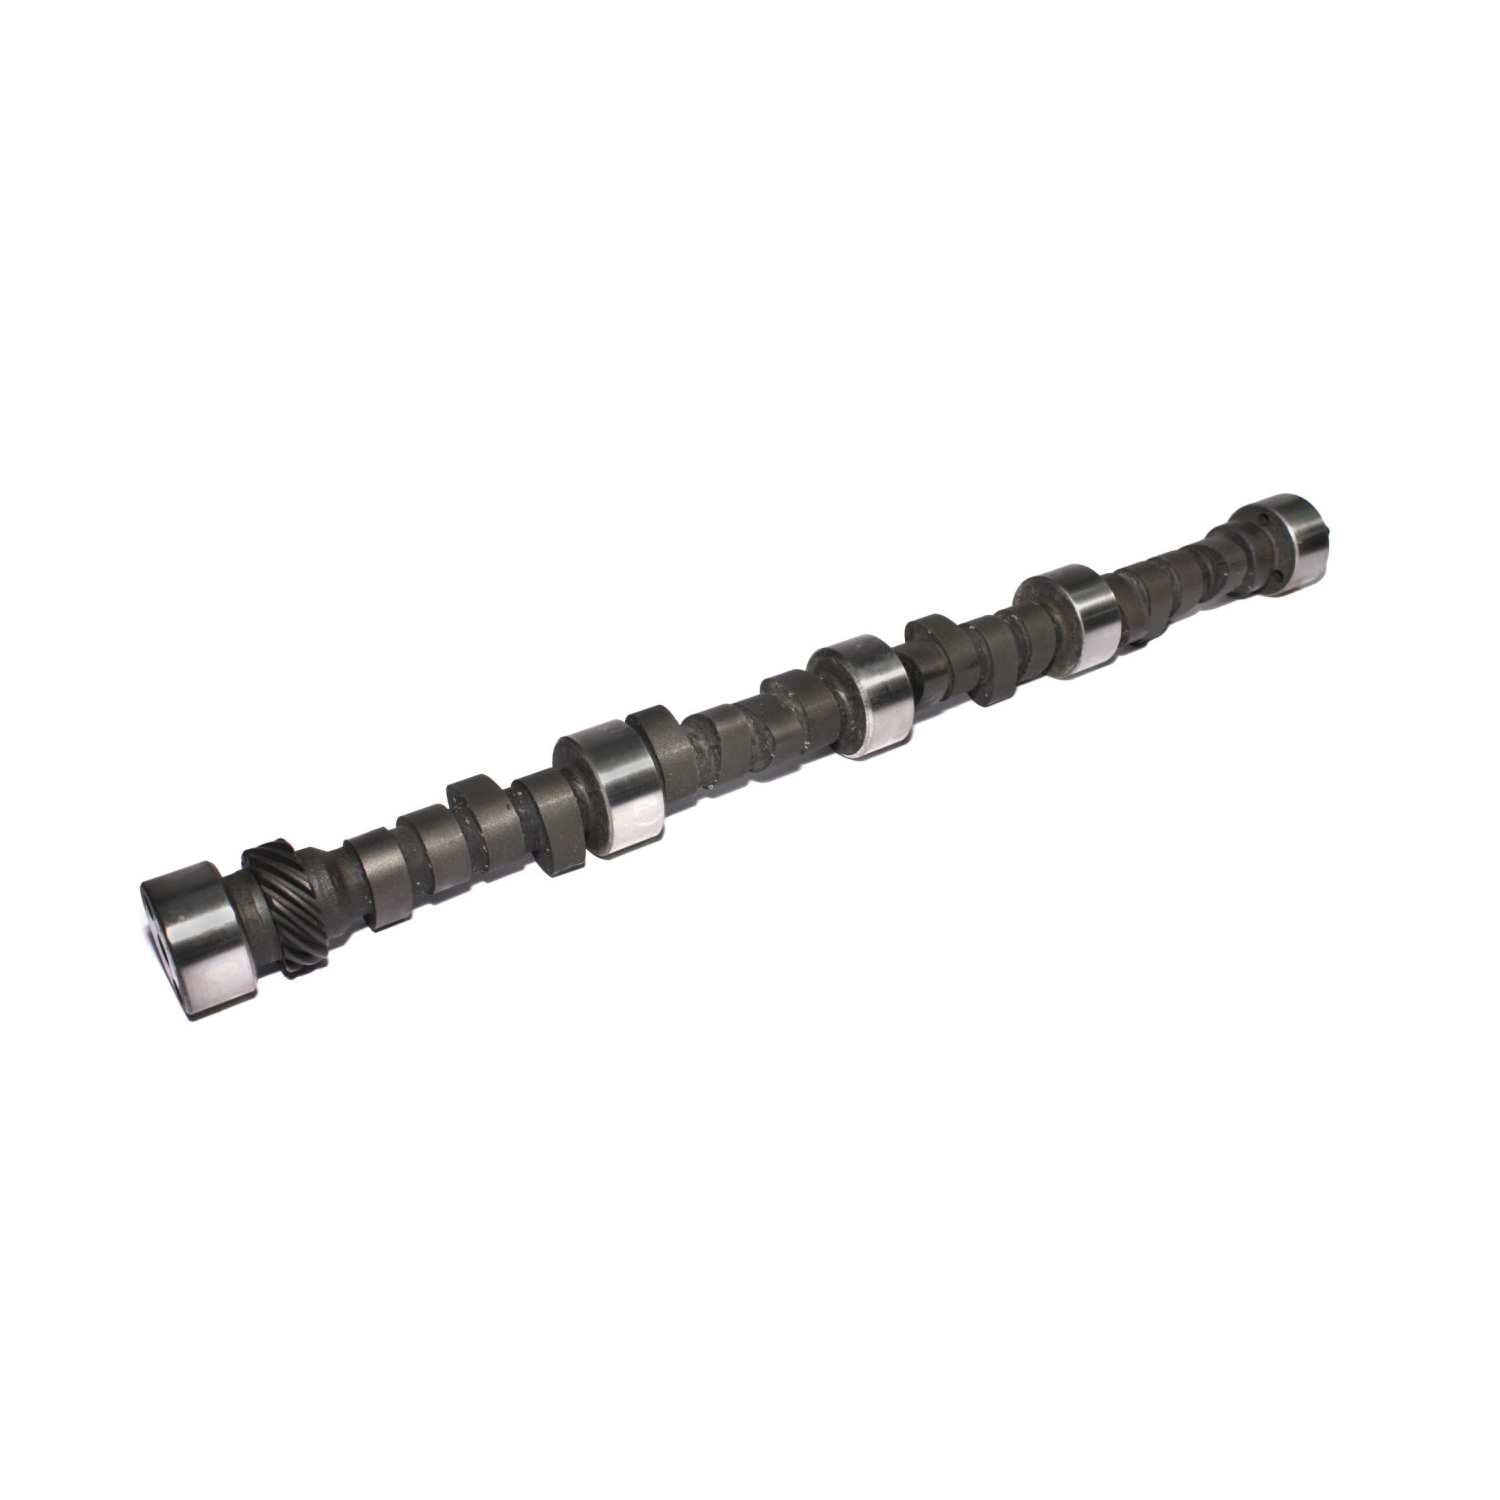 Competition Cams 11-654-47 Xtreme Energy 4/7 Swap Firing Order Camshaft